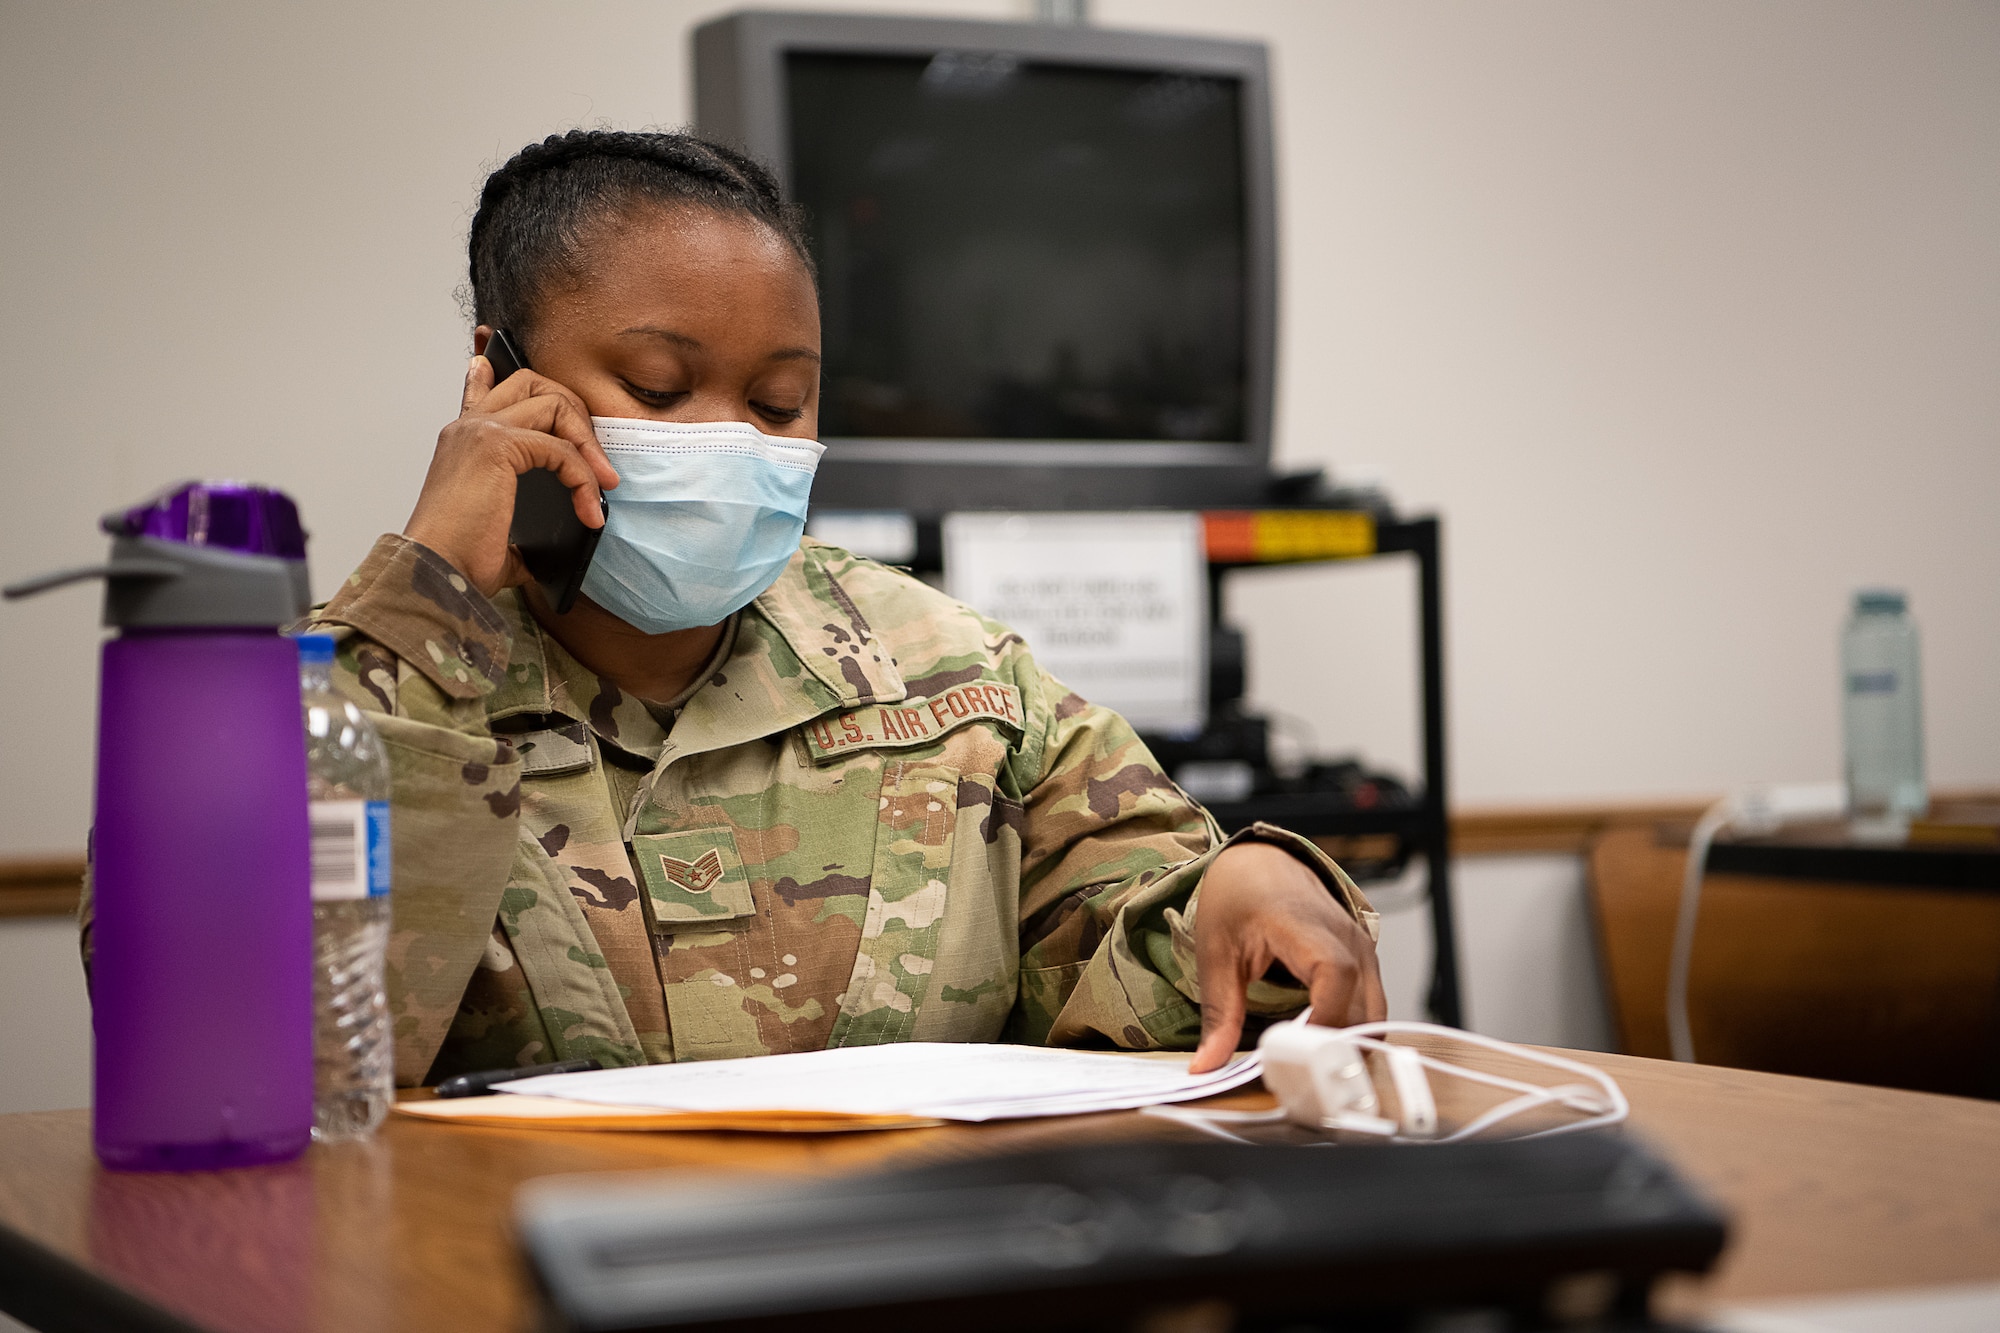 Oklahoma Air National Guard Staff Sgt. Shawntoria Miles, a medic with the 137th Special Operations Medical Group in Oklahoma City, calls an individual as part of contact tracing operations at the the Texas County Health Department in Guymon, Oklahoma, May 15, 2020.